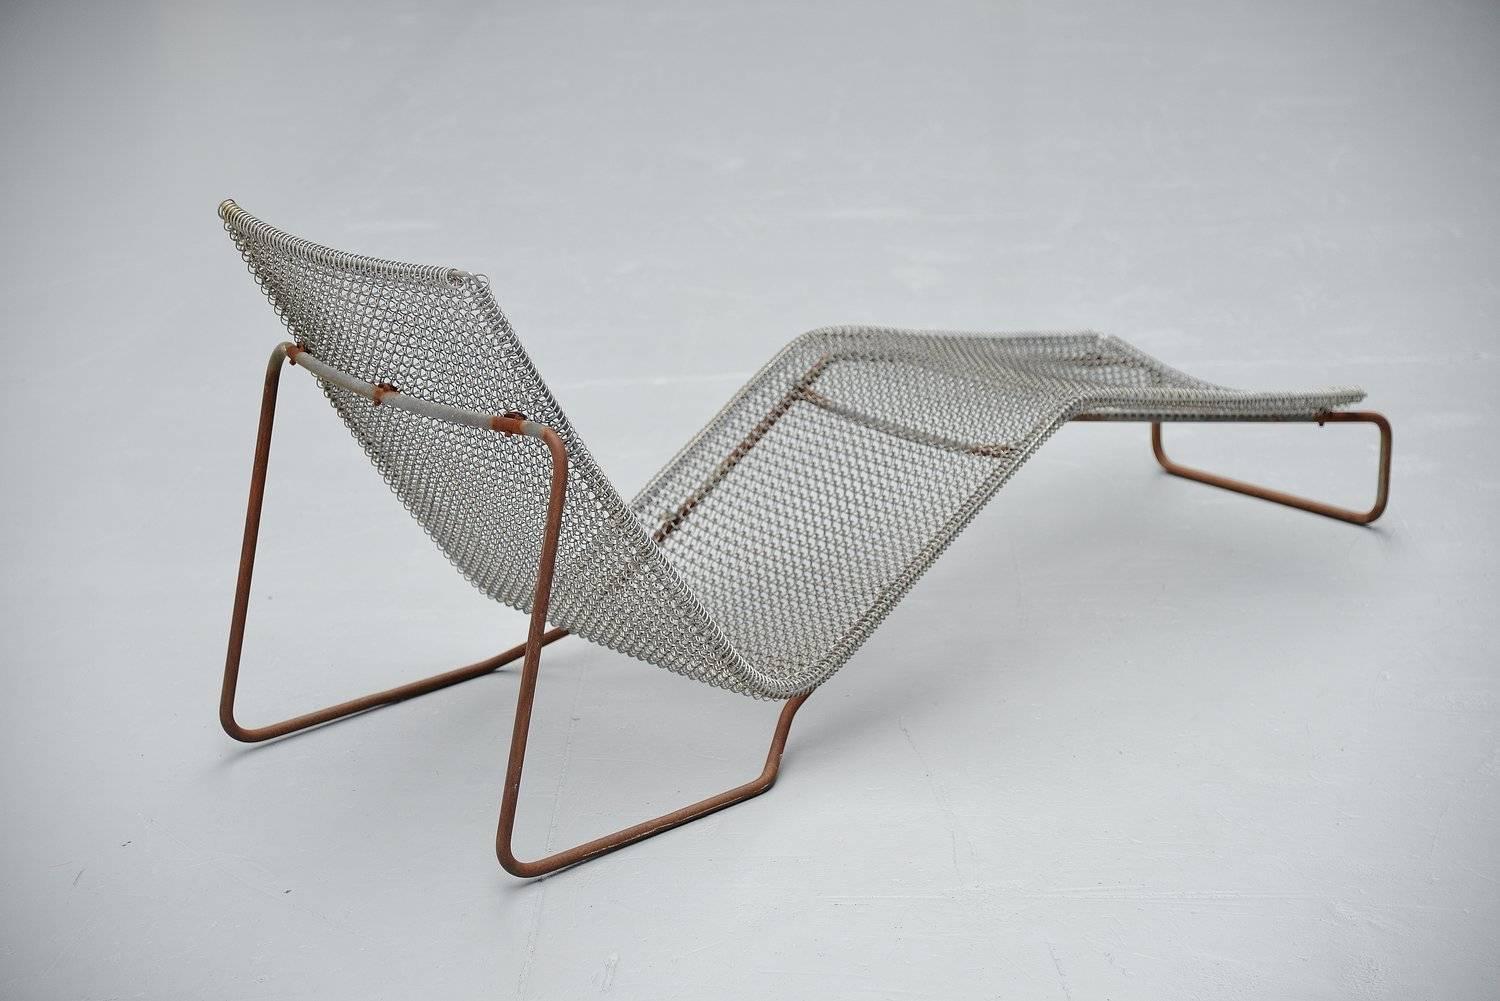 Very nice lounge chair designed by Niall O'Flynn for 't Spectrum, Holland 1997. This fantastic shaped lounge chair was in the collection of 't Spectrum from 1997-2001. I don't think many of these were made as I have rarely seen one. Very nice shaped